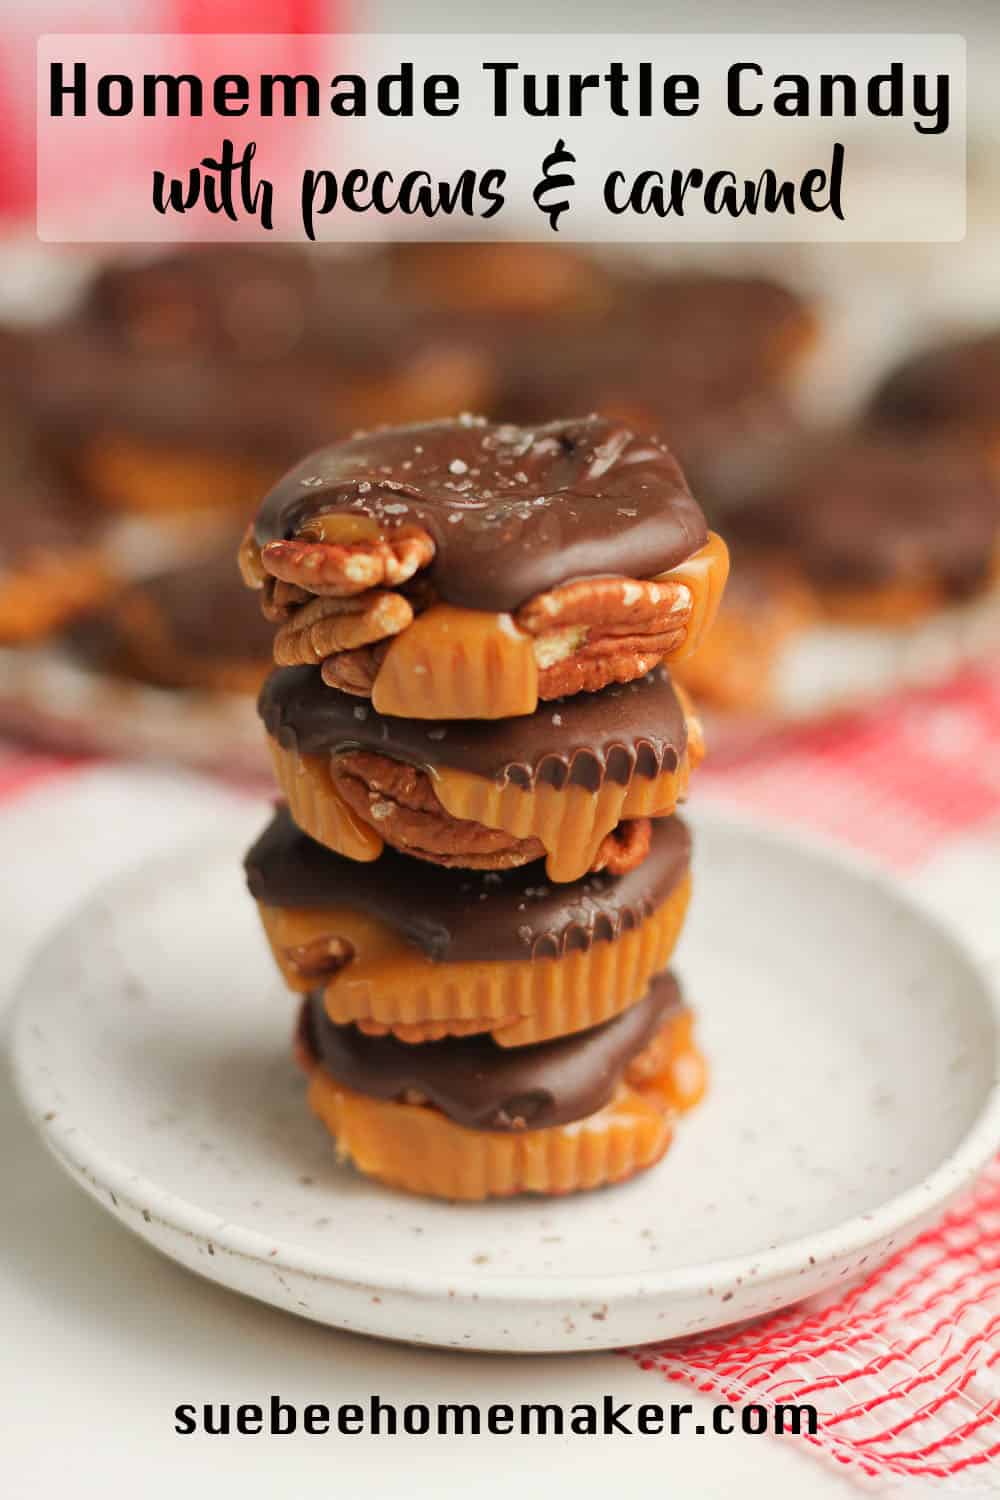 A stack of homemade turtle candy on a plate.